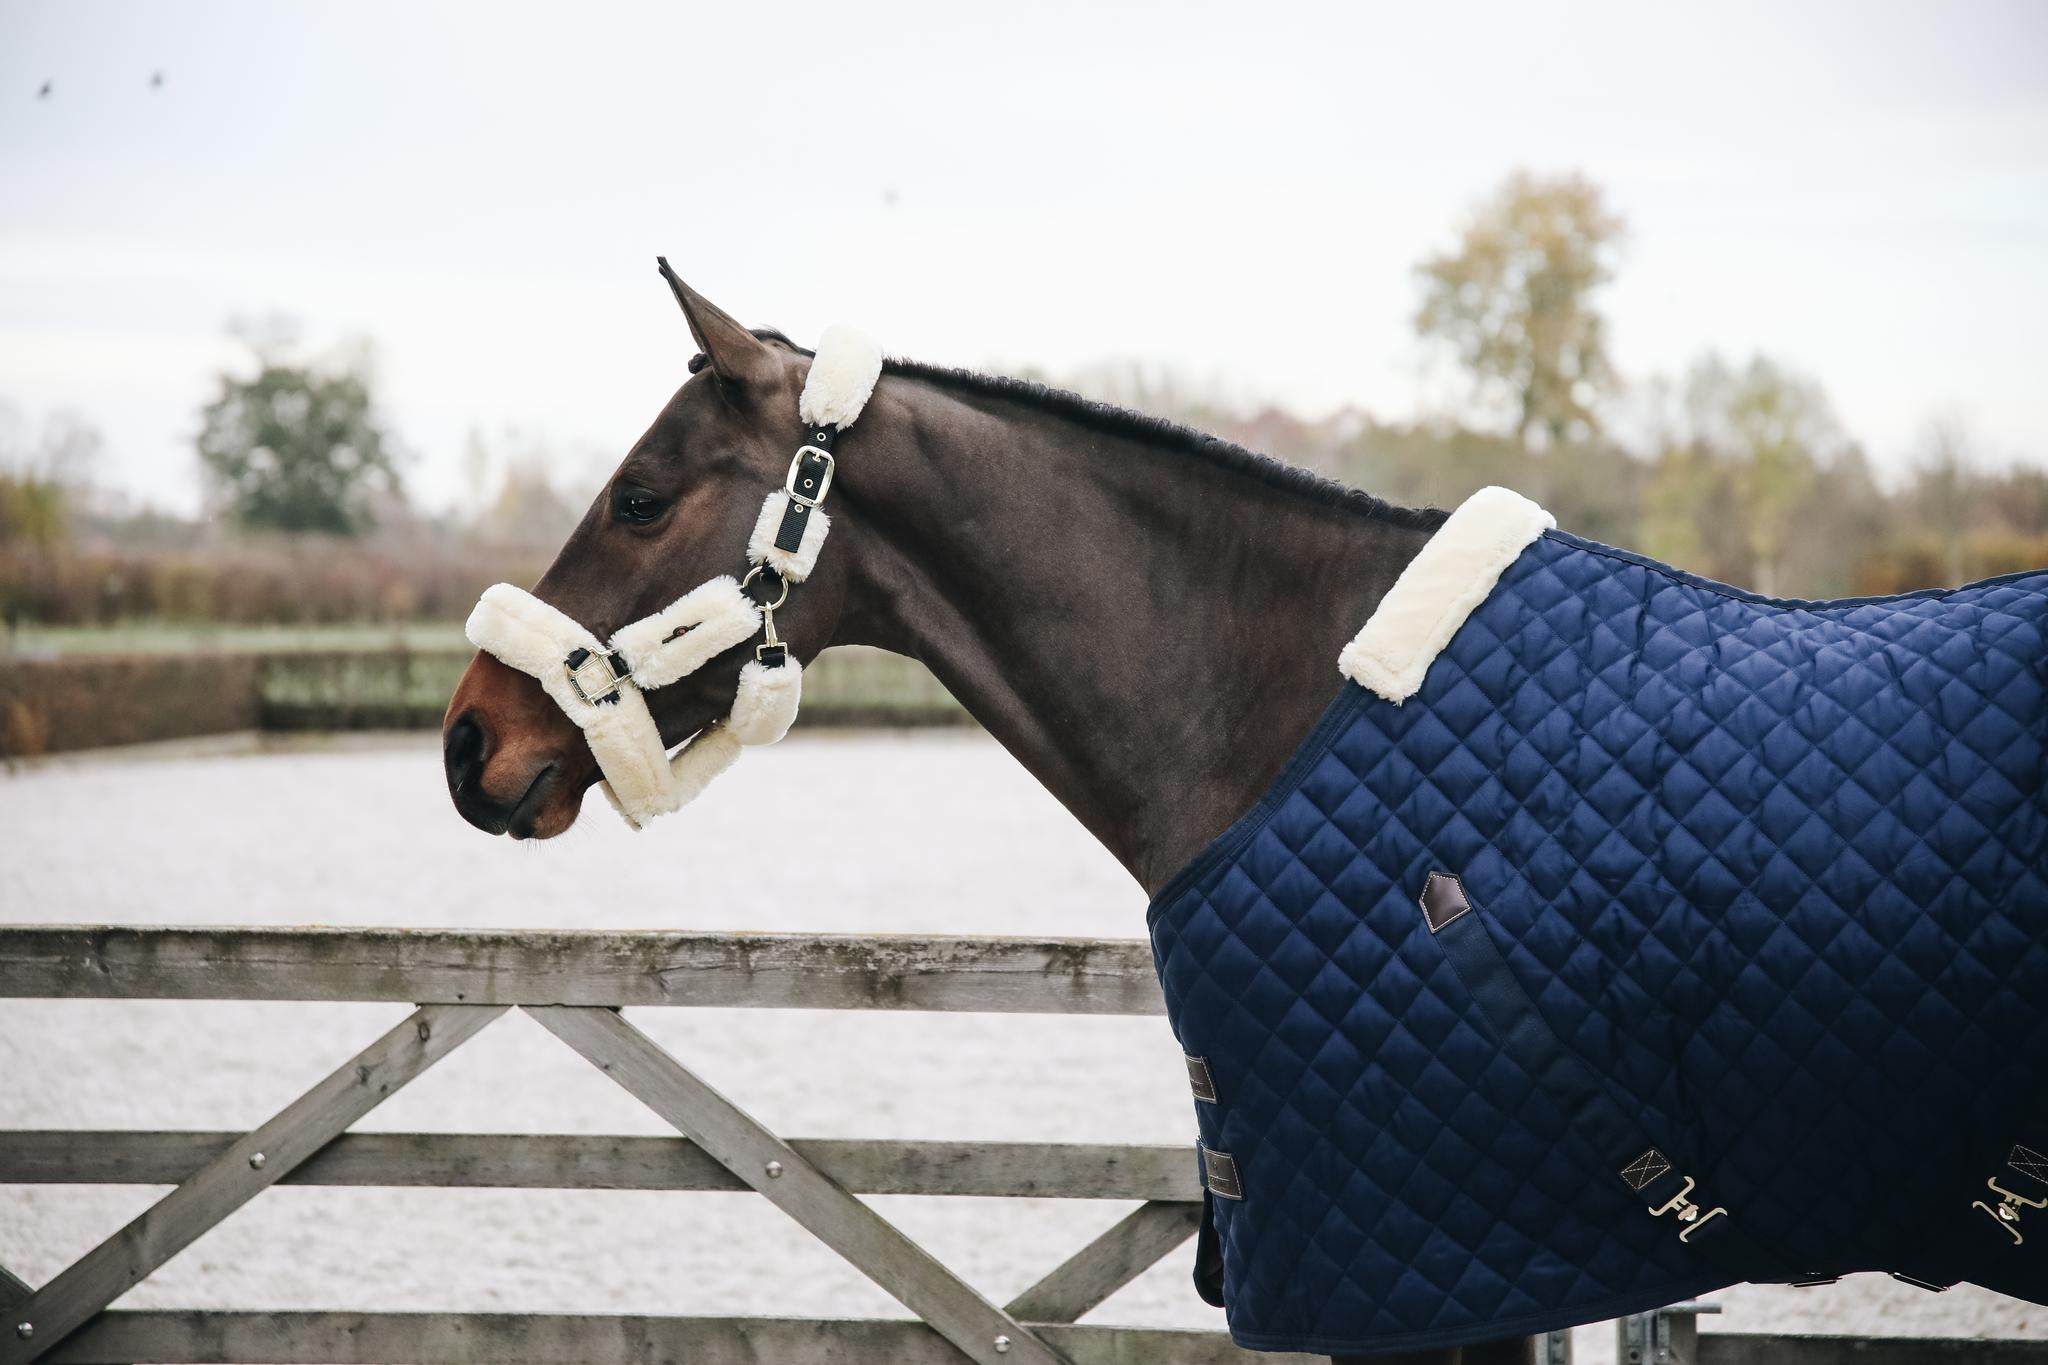 The Kentucky Stable Rug 200g is a stand out product from Kentucky Horsewear from their latest range. For any horse this is a very comfortable rug, a must-have for clipped horses or horses with sensitive skin. A lovely product, it is able to offer great warmth and comfort and it’s also a very easy to use rug for any rider. As well as being able to offer warmth, it is also highly breathable thanks to the combination of the materials.